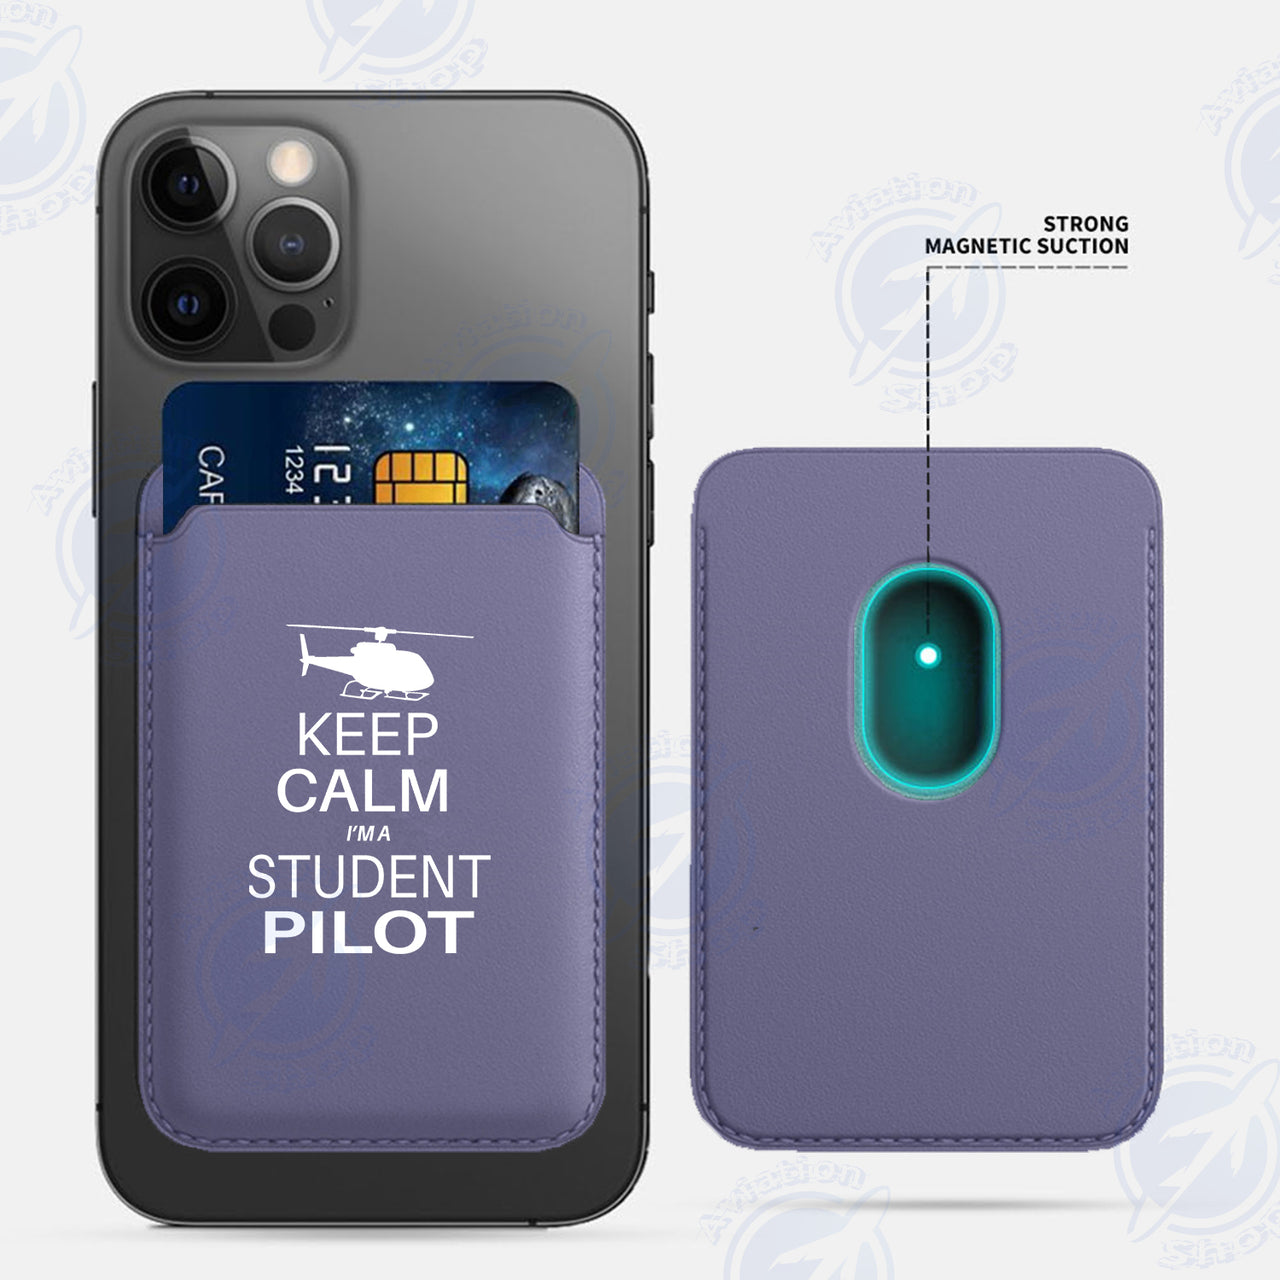 Student Pilot (Helicopter) iPhone Cases Magnetic Card Wallet